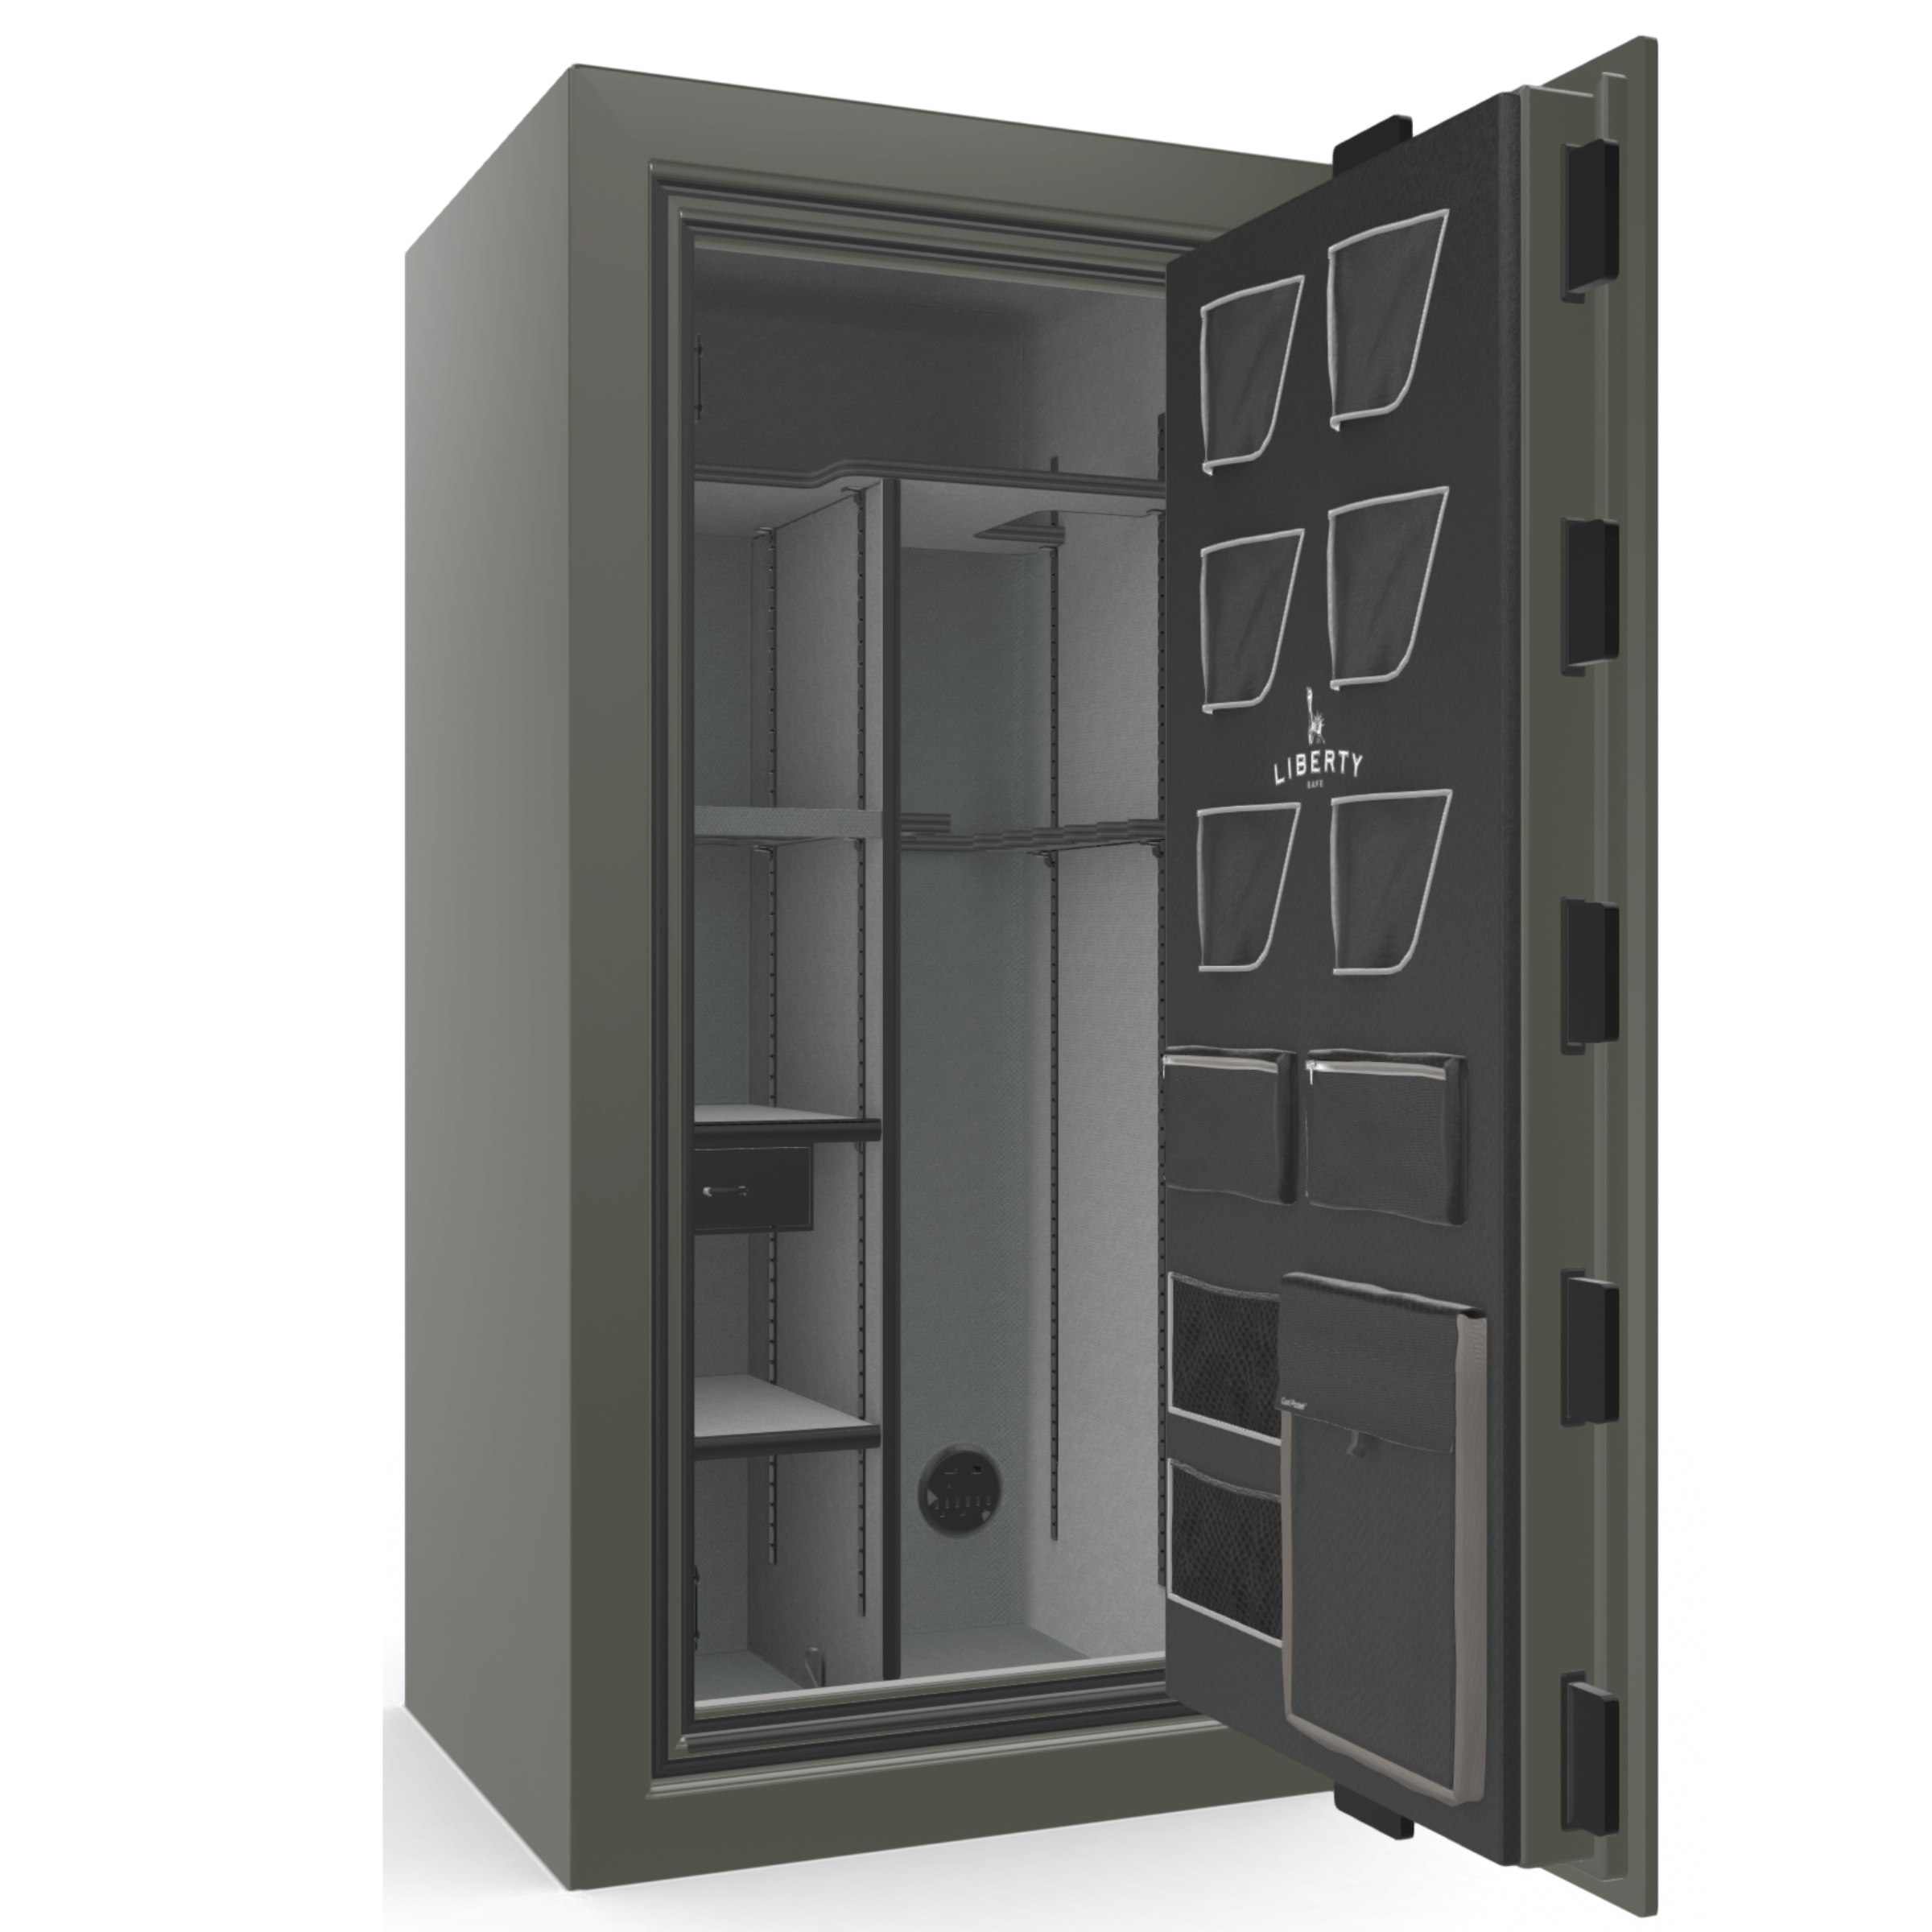 Classic Plus Series | Level 7 Security | 110 Minute Fire Protection | 40 | DIMENSIONS: 66.5"(H) X 36"(W) X 32"(D) | Gray 2 Tone | Electronic Lock, photo 26